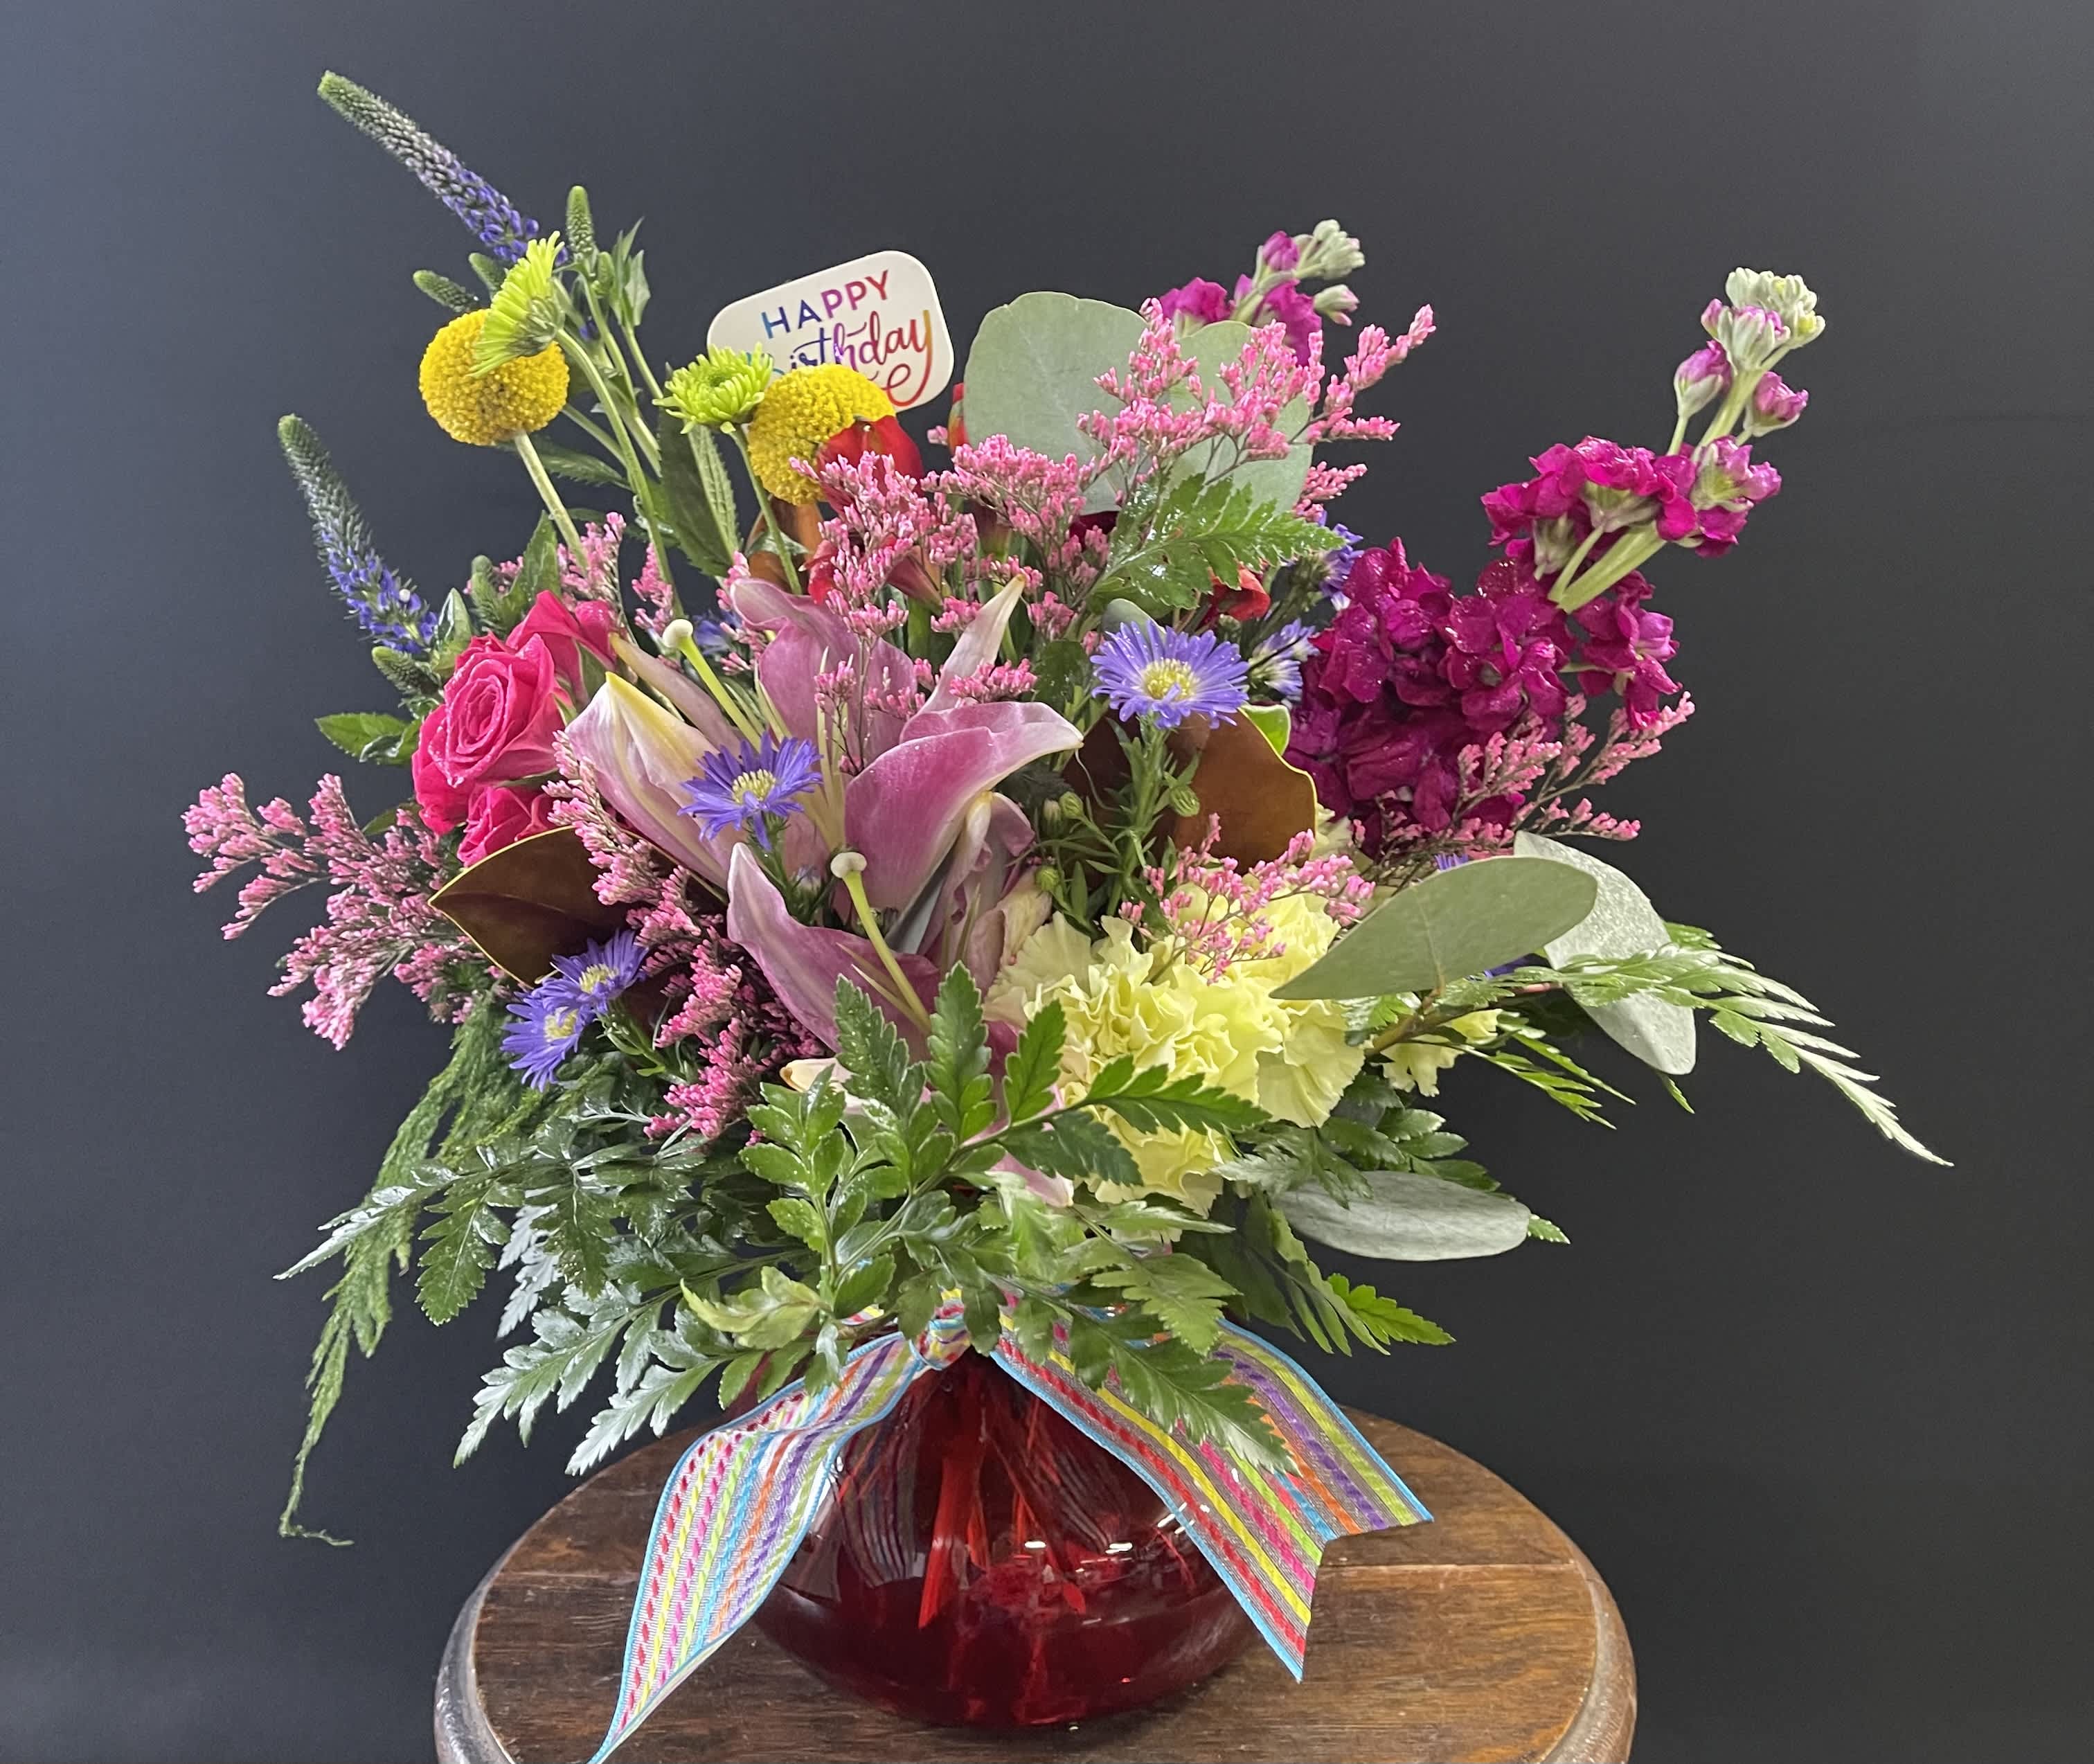 Birthday Posie - Colorful, sweet, and just perfect for a birthday bouquet! 